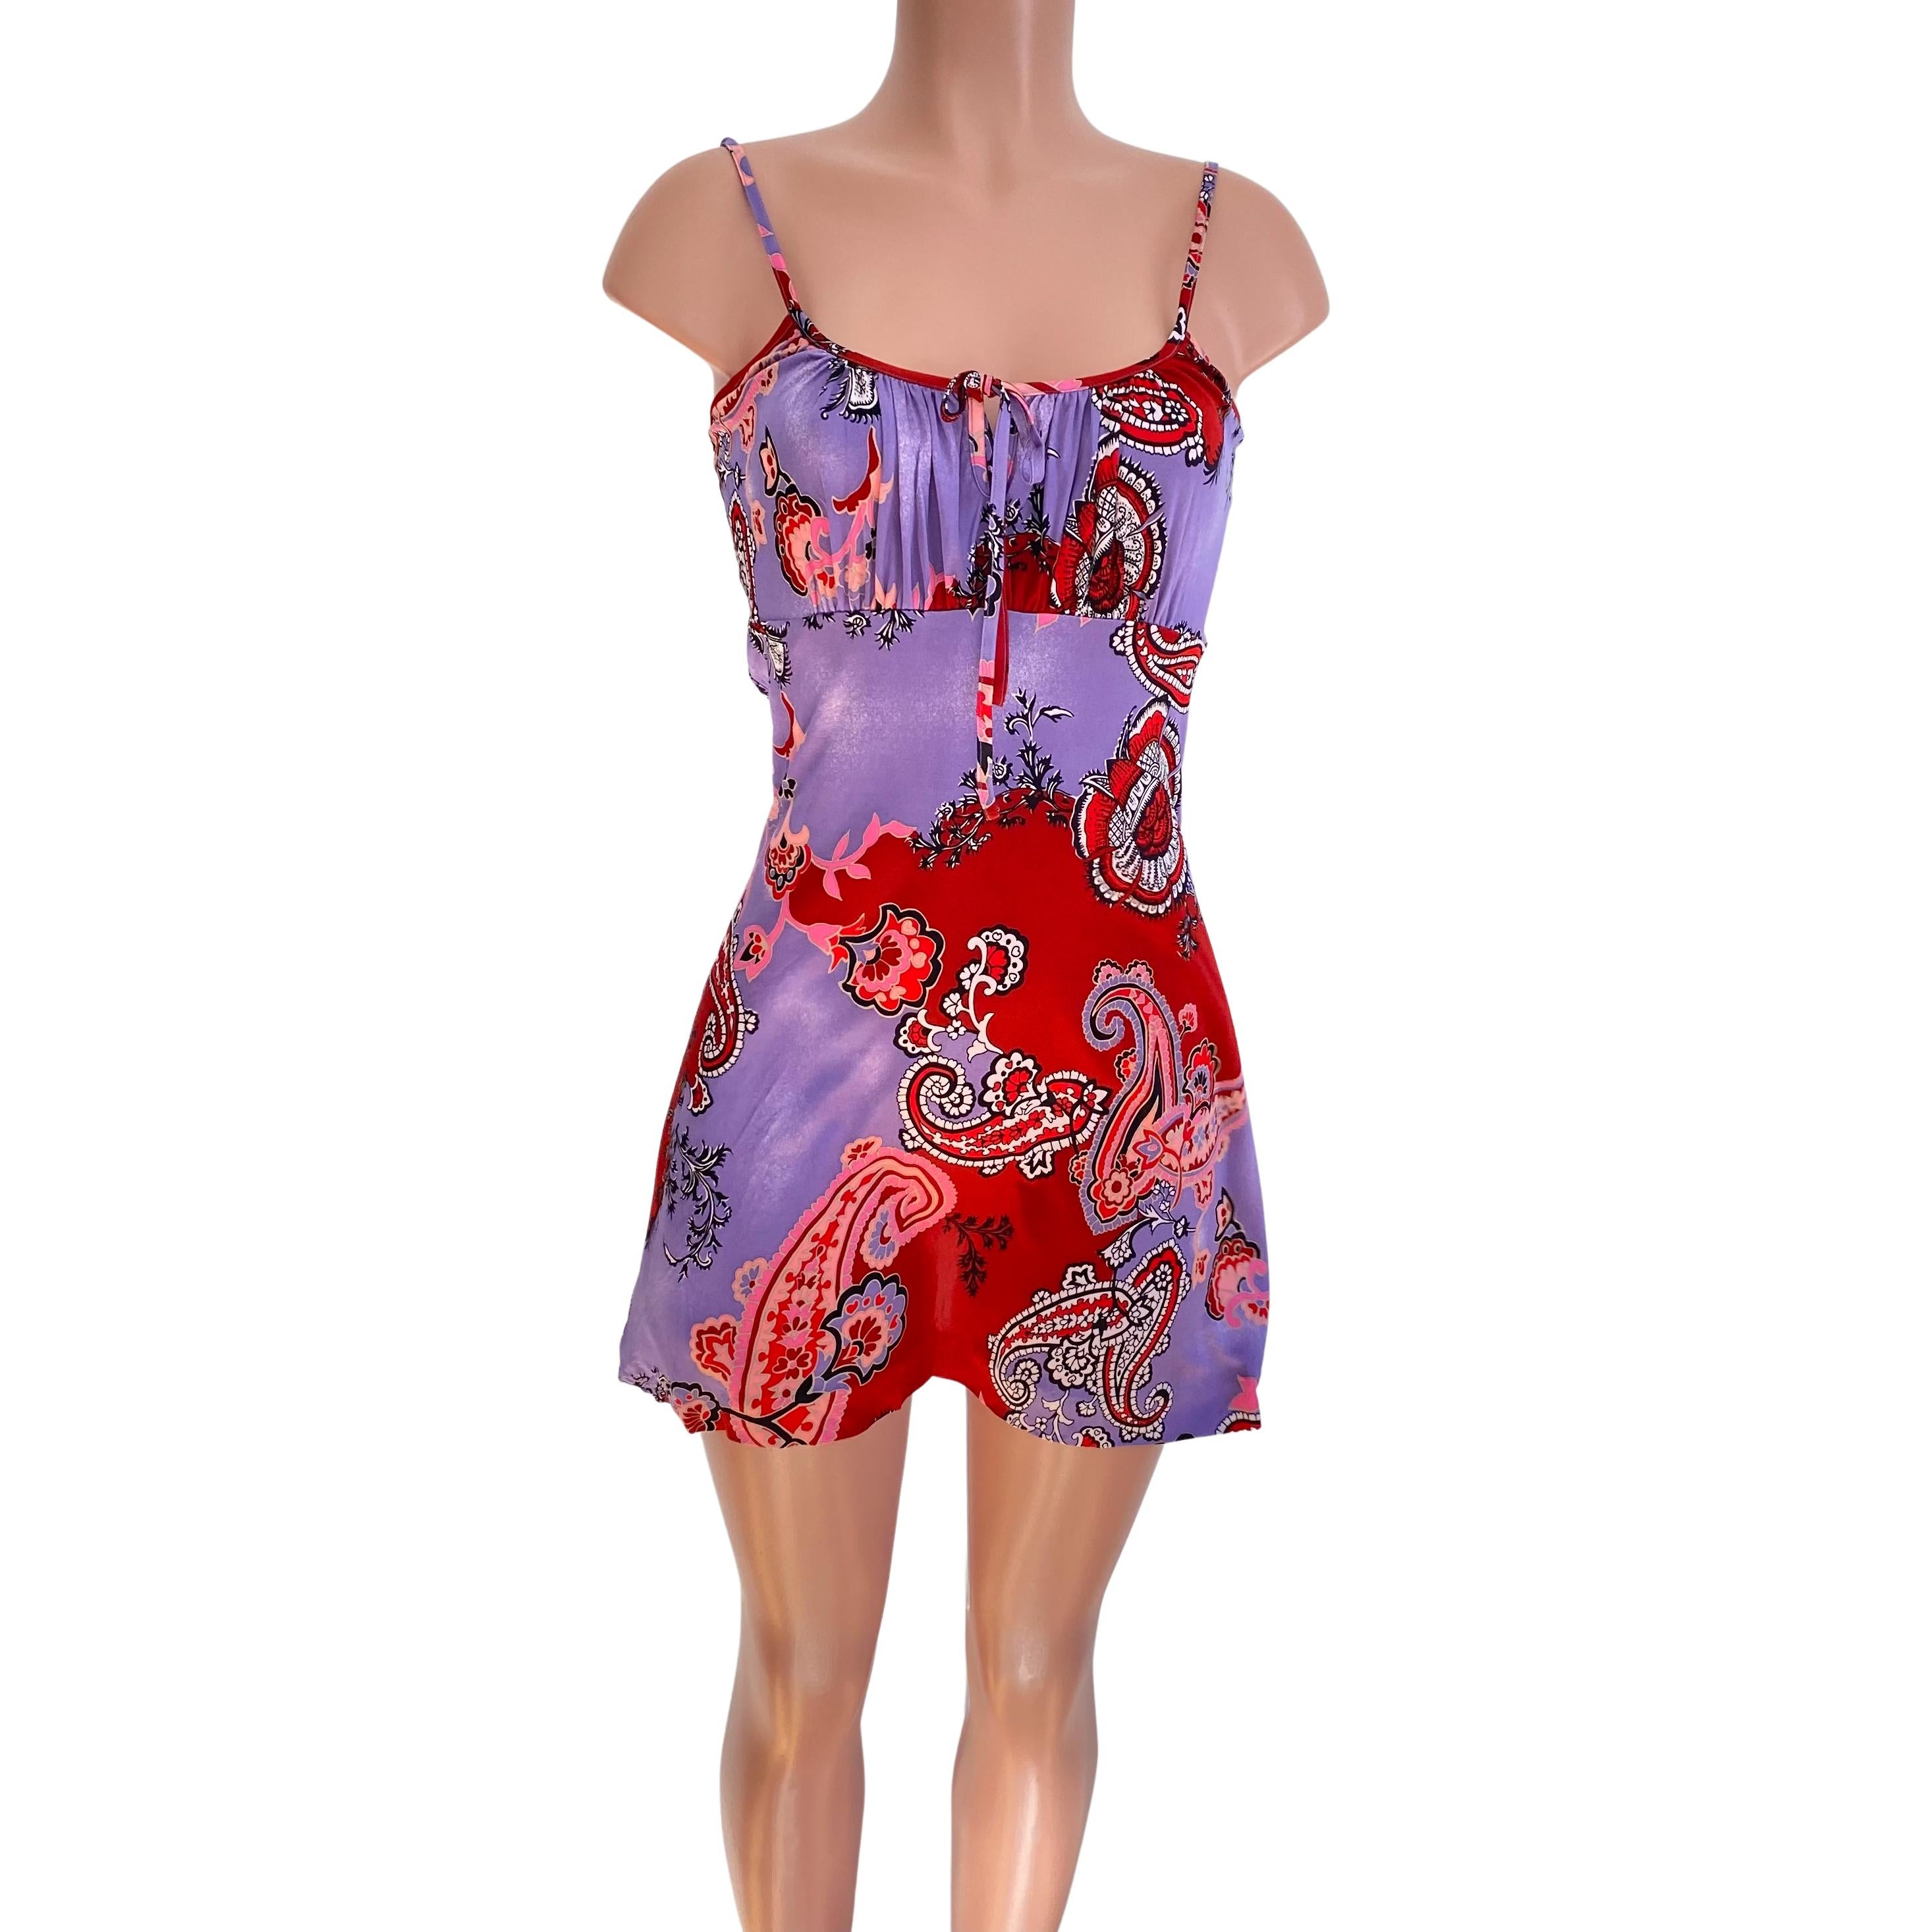 Condition: NEW WITH TAG.
Alluring little mini dress with drawstring tie at center front + adjustable shoulder straps for a perfectly flattering fit.

Approximately 36